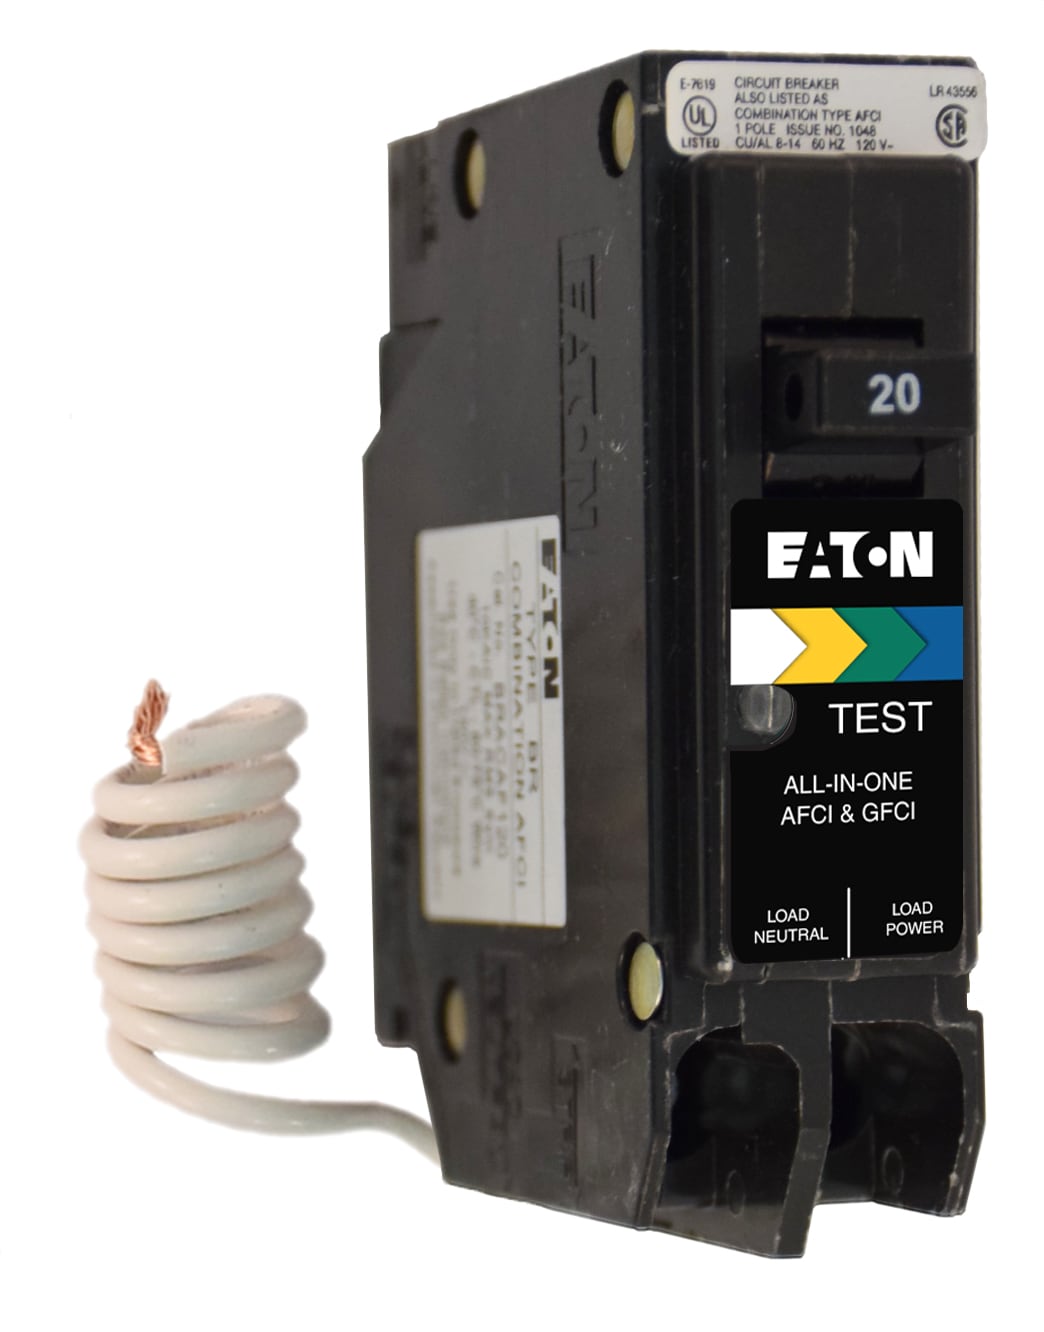 New Eaton Cutler-Hammer 15A amp BR Circuit Breaker w Ground Fault Protection 